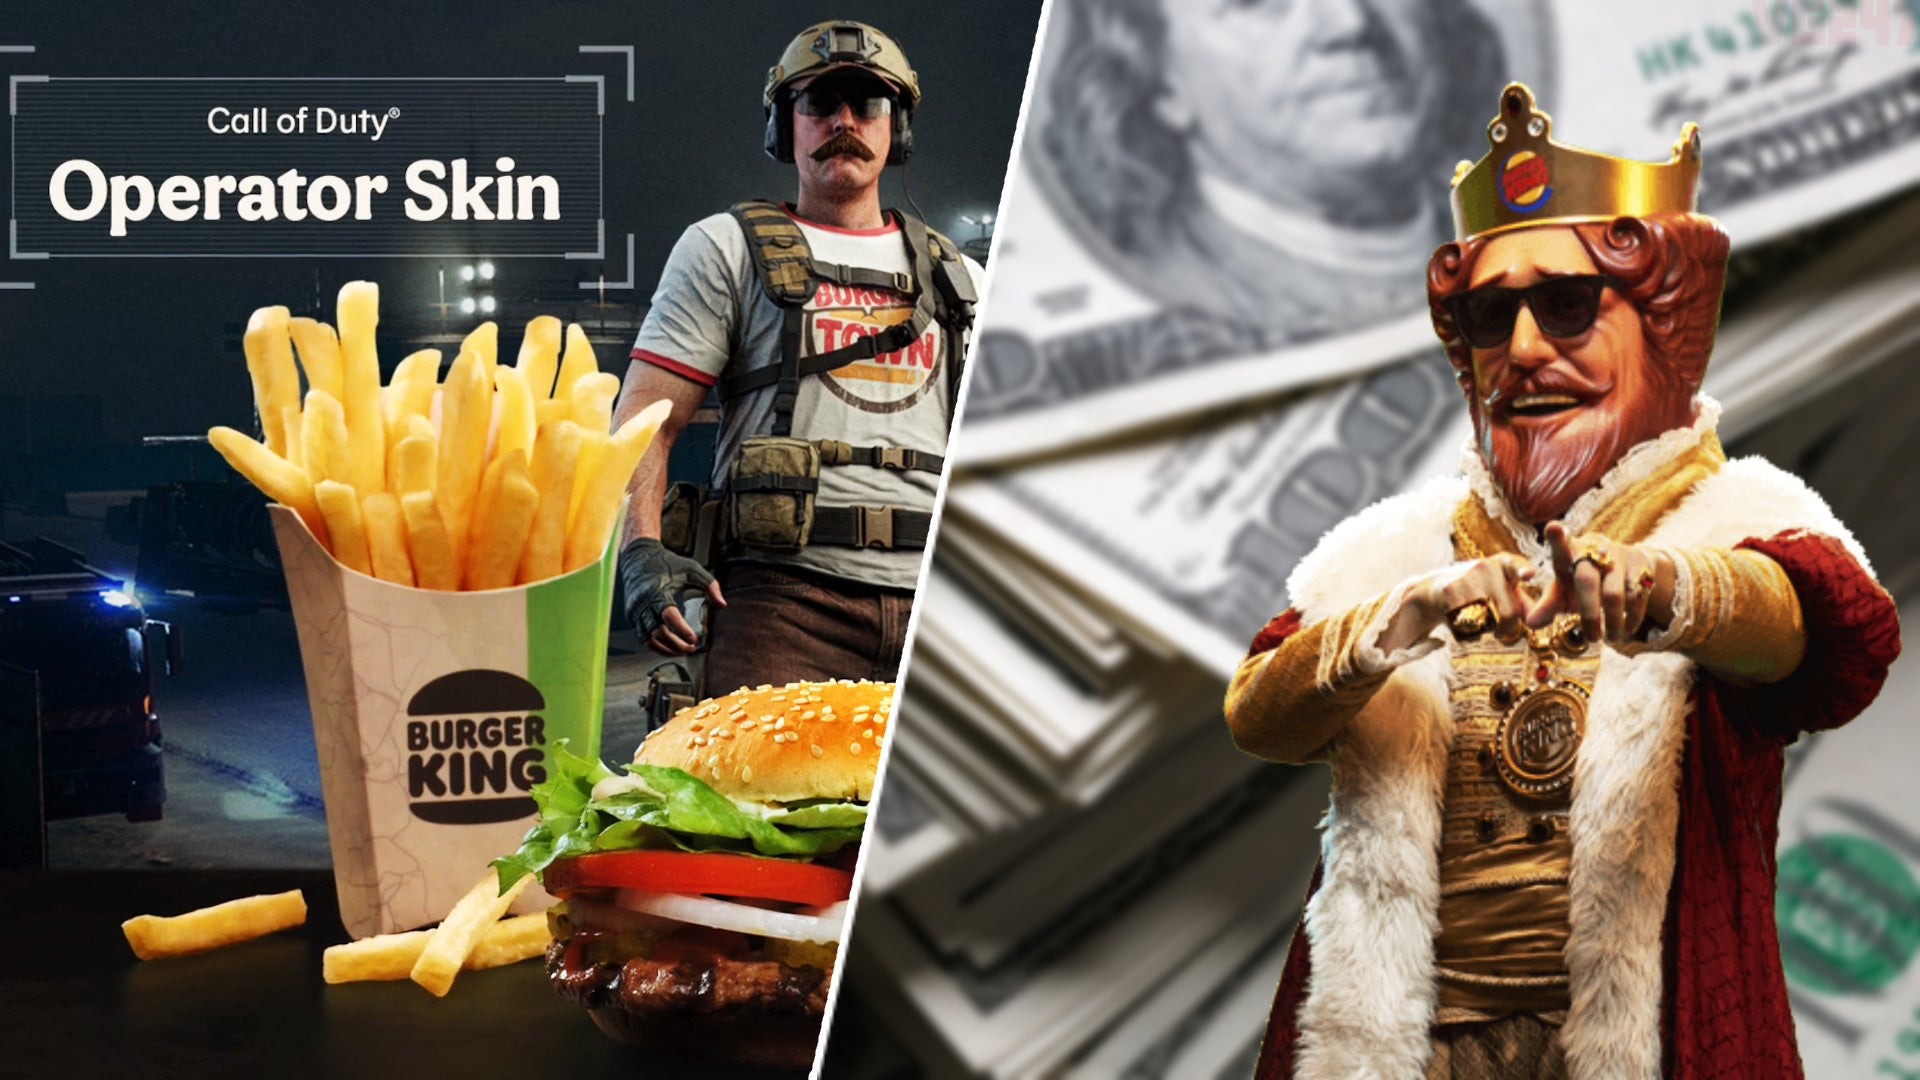 00 later, he’s starting a family: For some, MW2’s Burger King skin grey market is paying out big